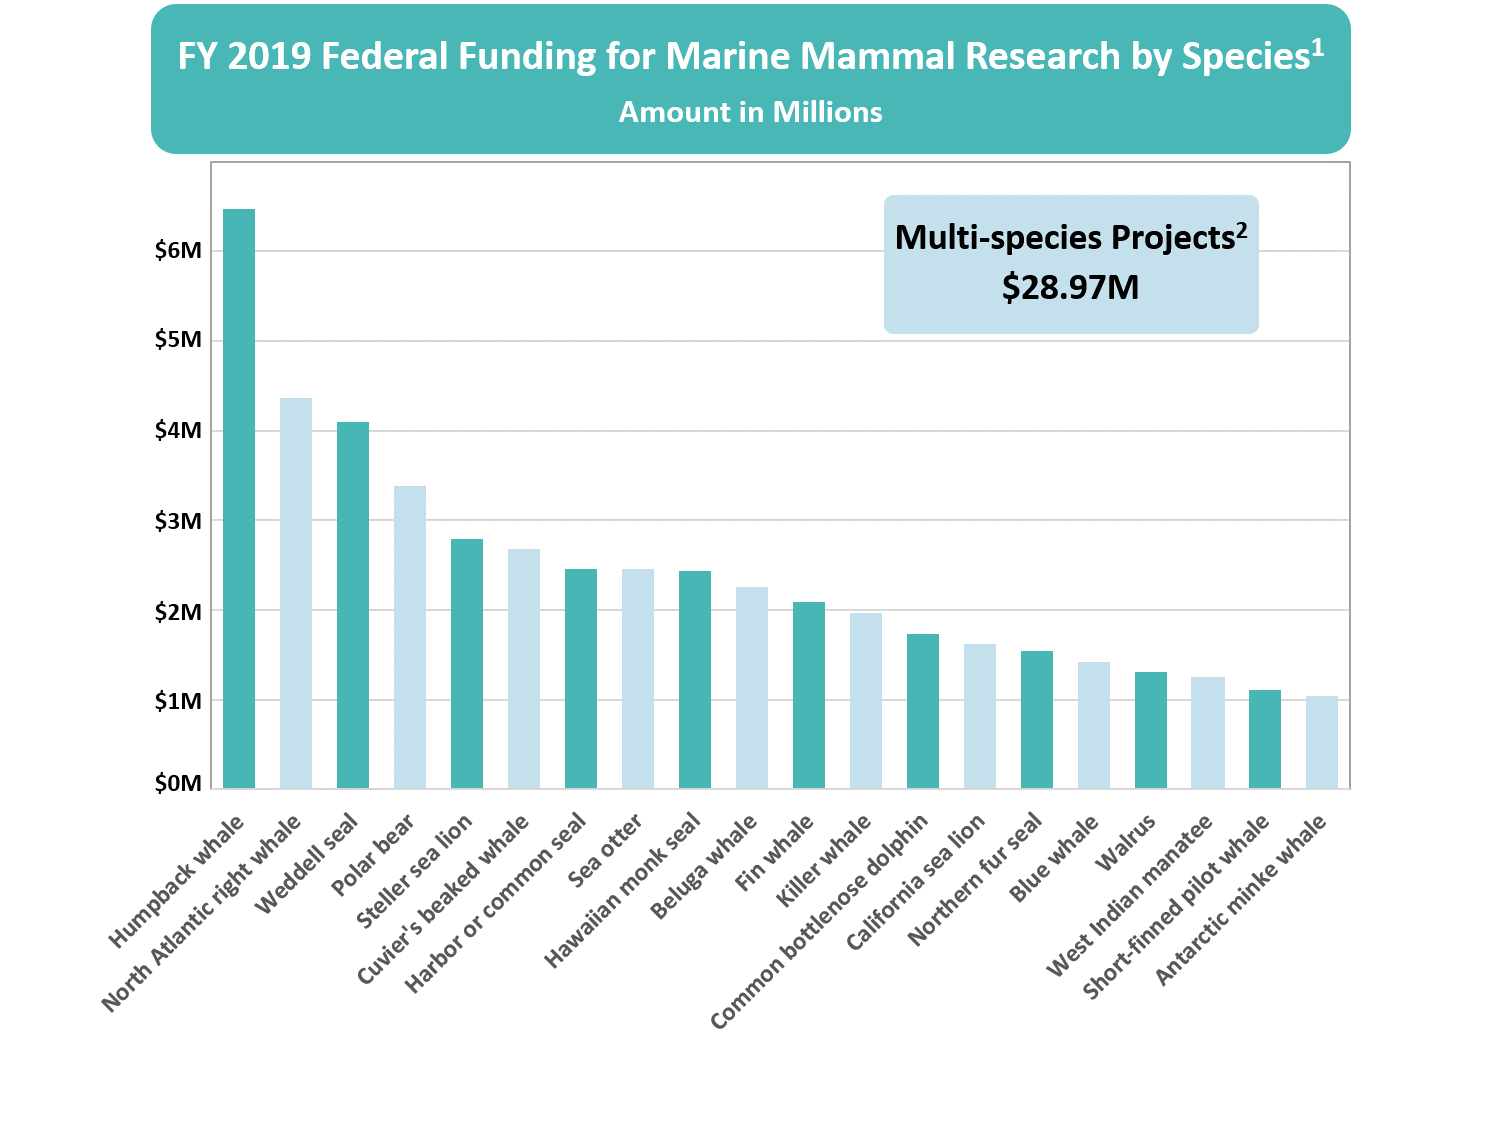 Bar char of funding species funding levels reported in the FY 2019 SFFR.